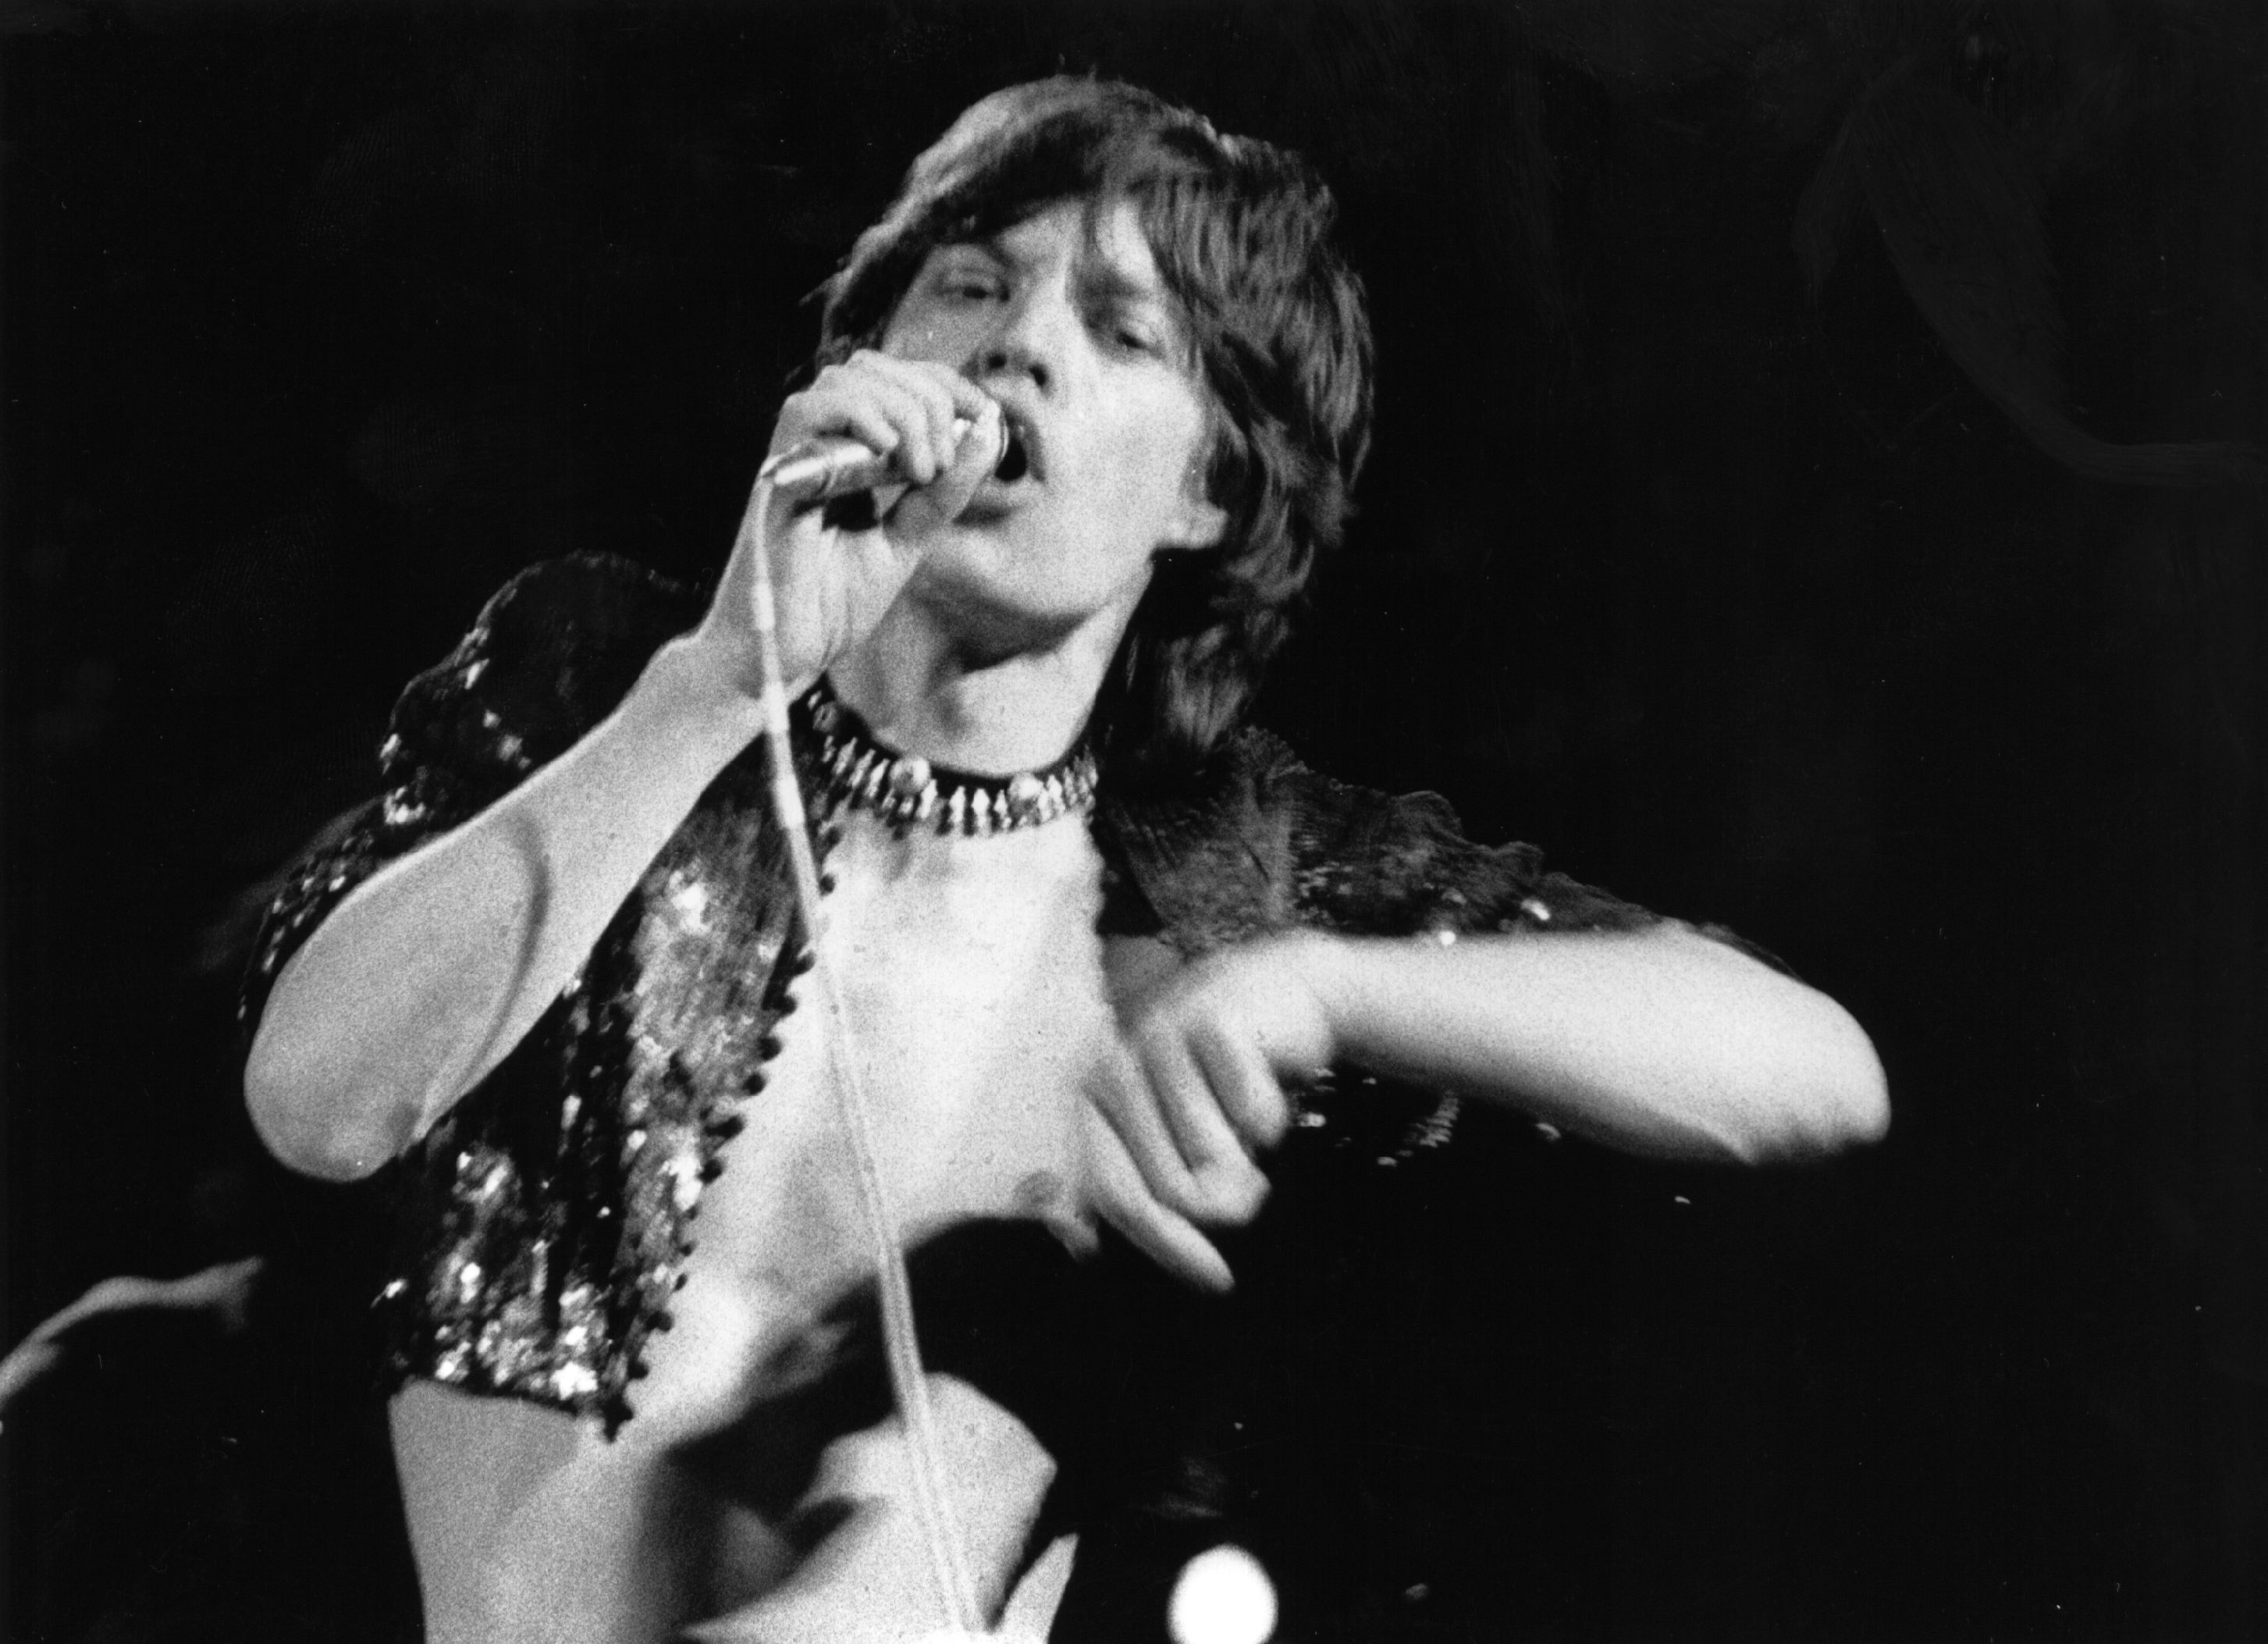 Mike Jagger of The Rolling Stones with a microphone